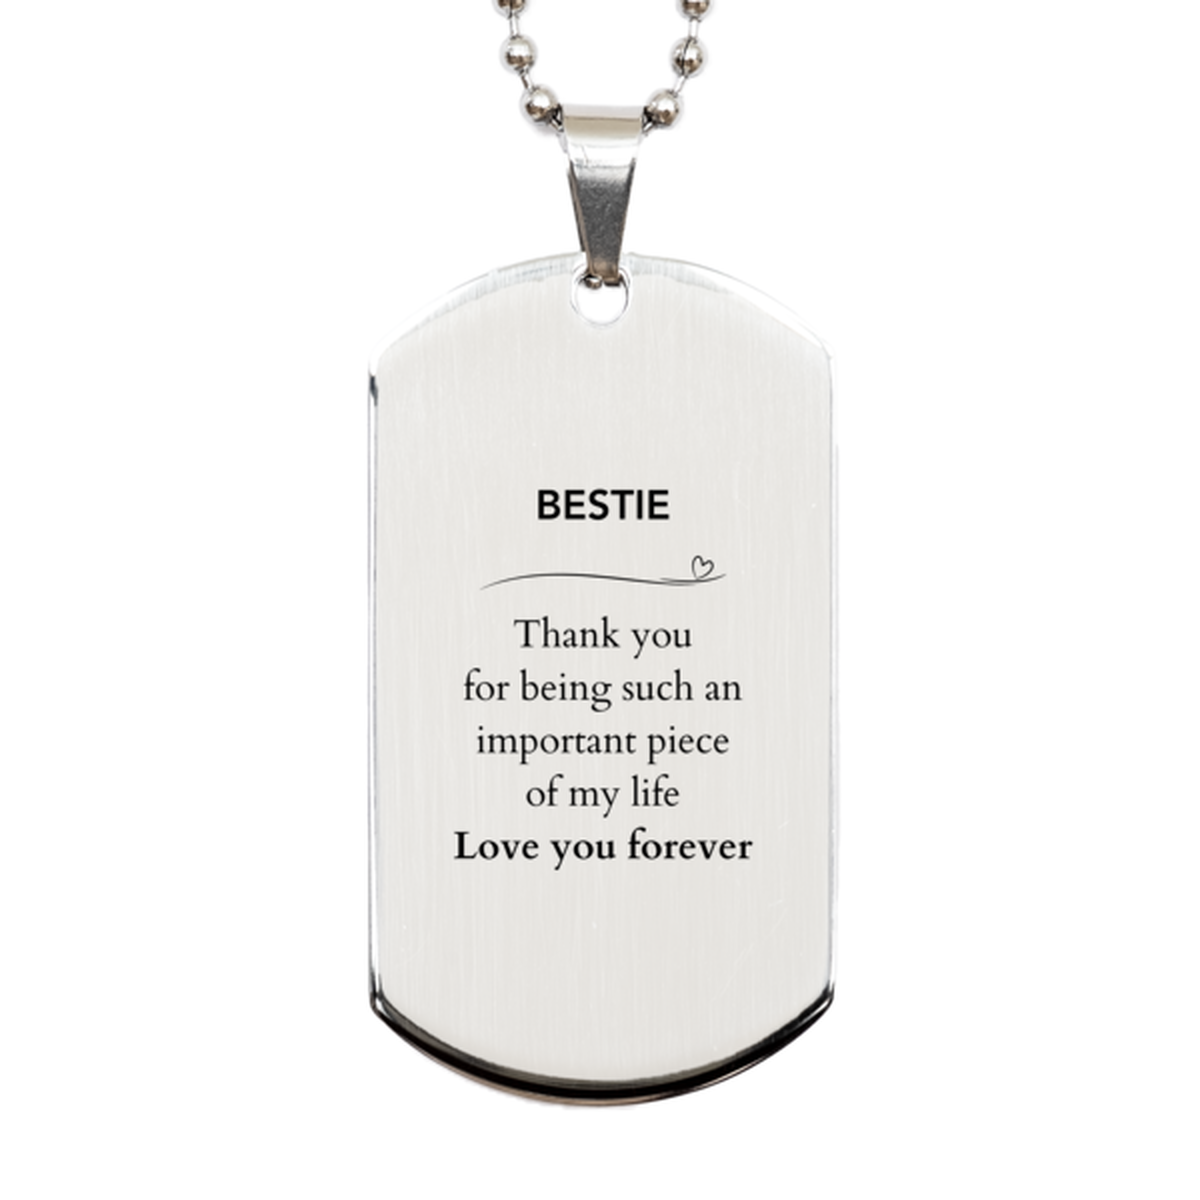 Appropriate Bestie Silver Dog Tag Epic Birthday Gifts for Bestie Thank you for being such an important piece of my life Bestie Christmas Mothers Fathers Day